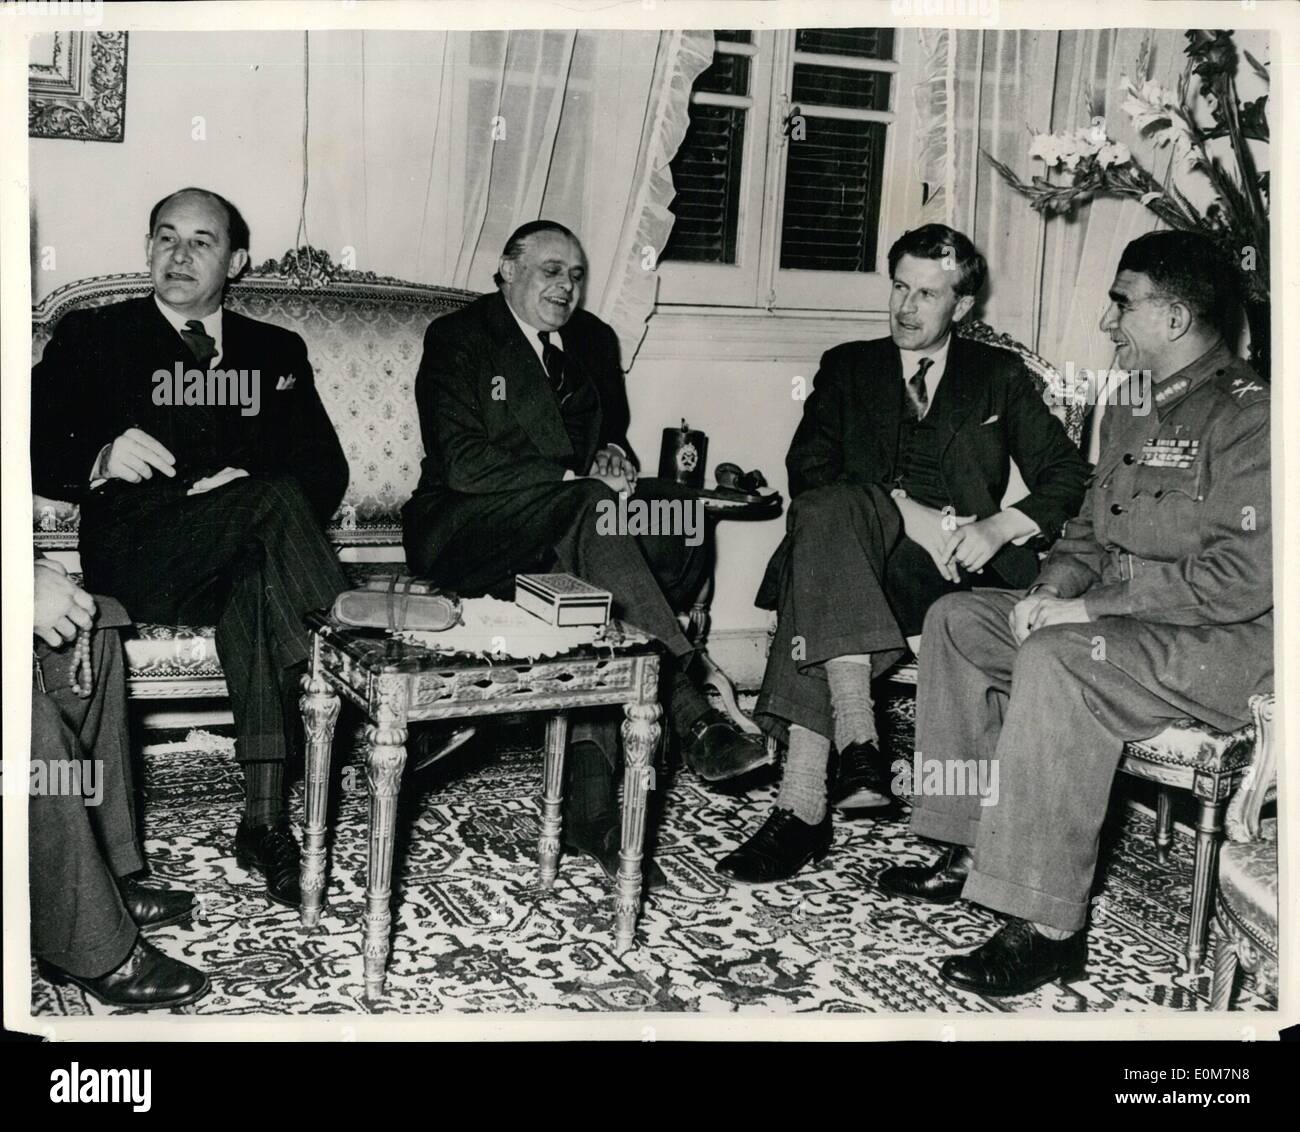 Jan. 01, 1954 - British M. P.'s received B General Neguib.; During a recent visit to Cairo, three members of Parllament (L to R0: Mr. P. Gordon Walker ( Socialist), CDR. D. Marshal (conservative), and Mr. J. Grimond (Liberal), were received by General Neguib (right) Stock Photo